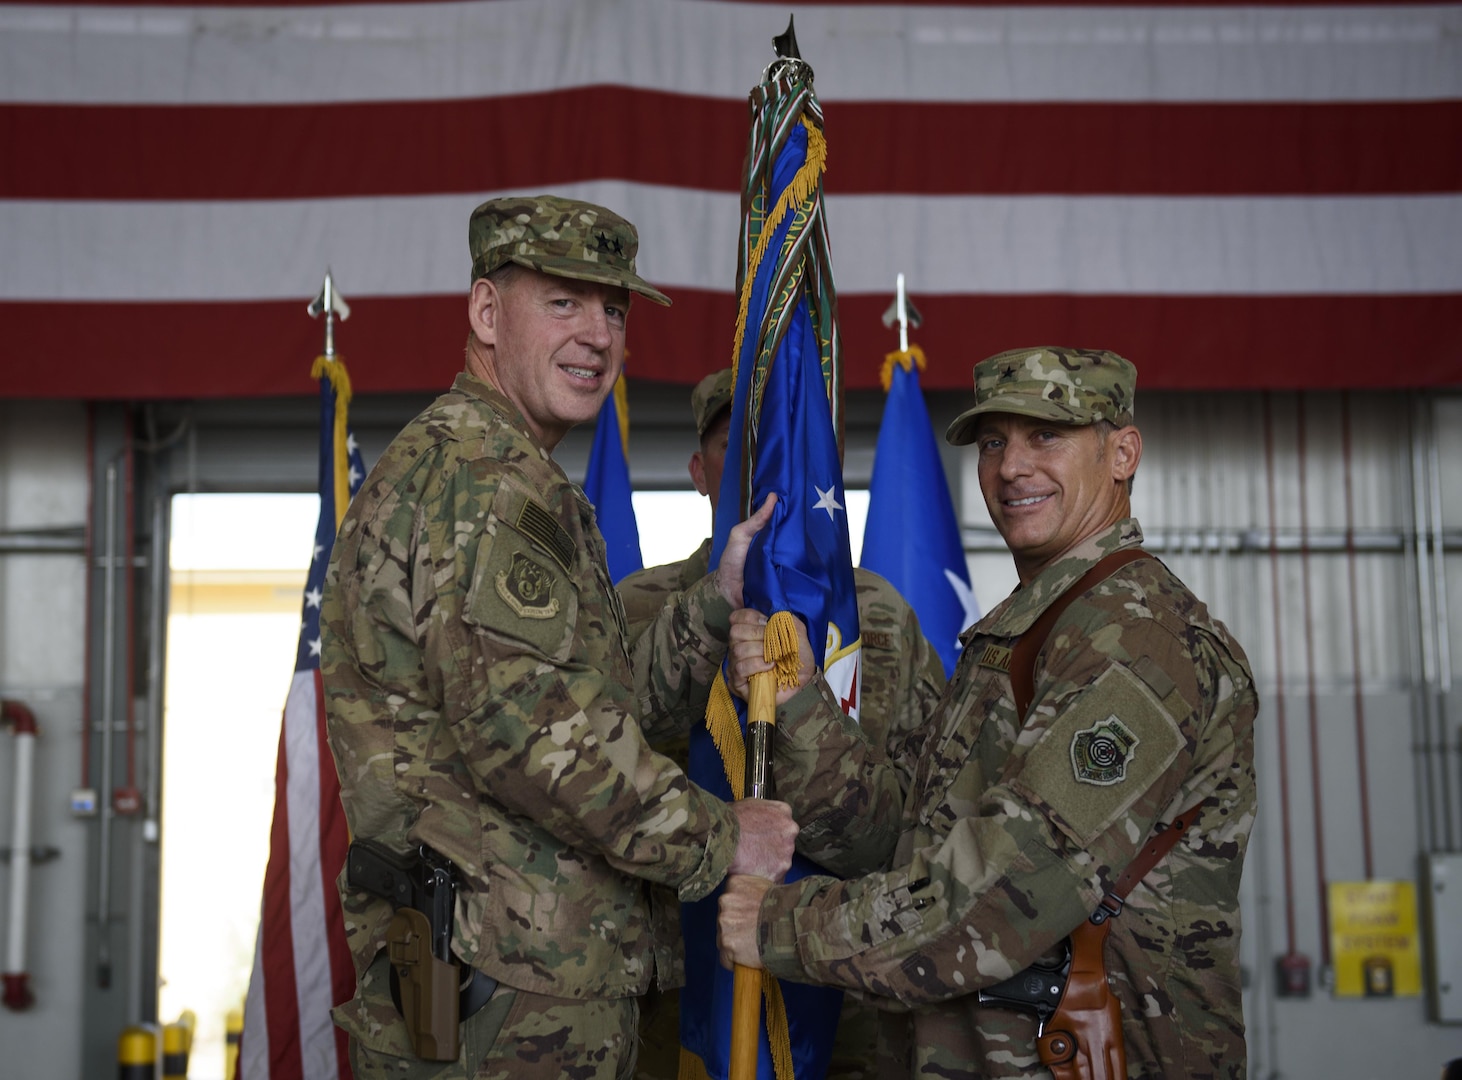 Brig. Gen. Craig Baker, the incoming 455th Air Expeditionary Wing commander, receives the 455th AEW guidon from Maj. Gen. James Hecker, the 9th Air and Space Expeditionary Task Force-Afghanistan commander, which officially grants him command of the 455th AEW during a change of command ceremony at Bagram Airfield, Afghanistan, June 3, 2017. Baker is a command pilot with more than 2,600 flying hours and has commanded at the Squadron and Wing level. (U.S. Air Force photo by Staff Sgt. Benjamin Gonsier)